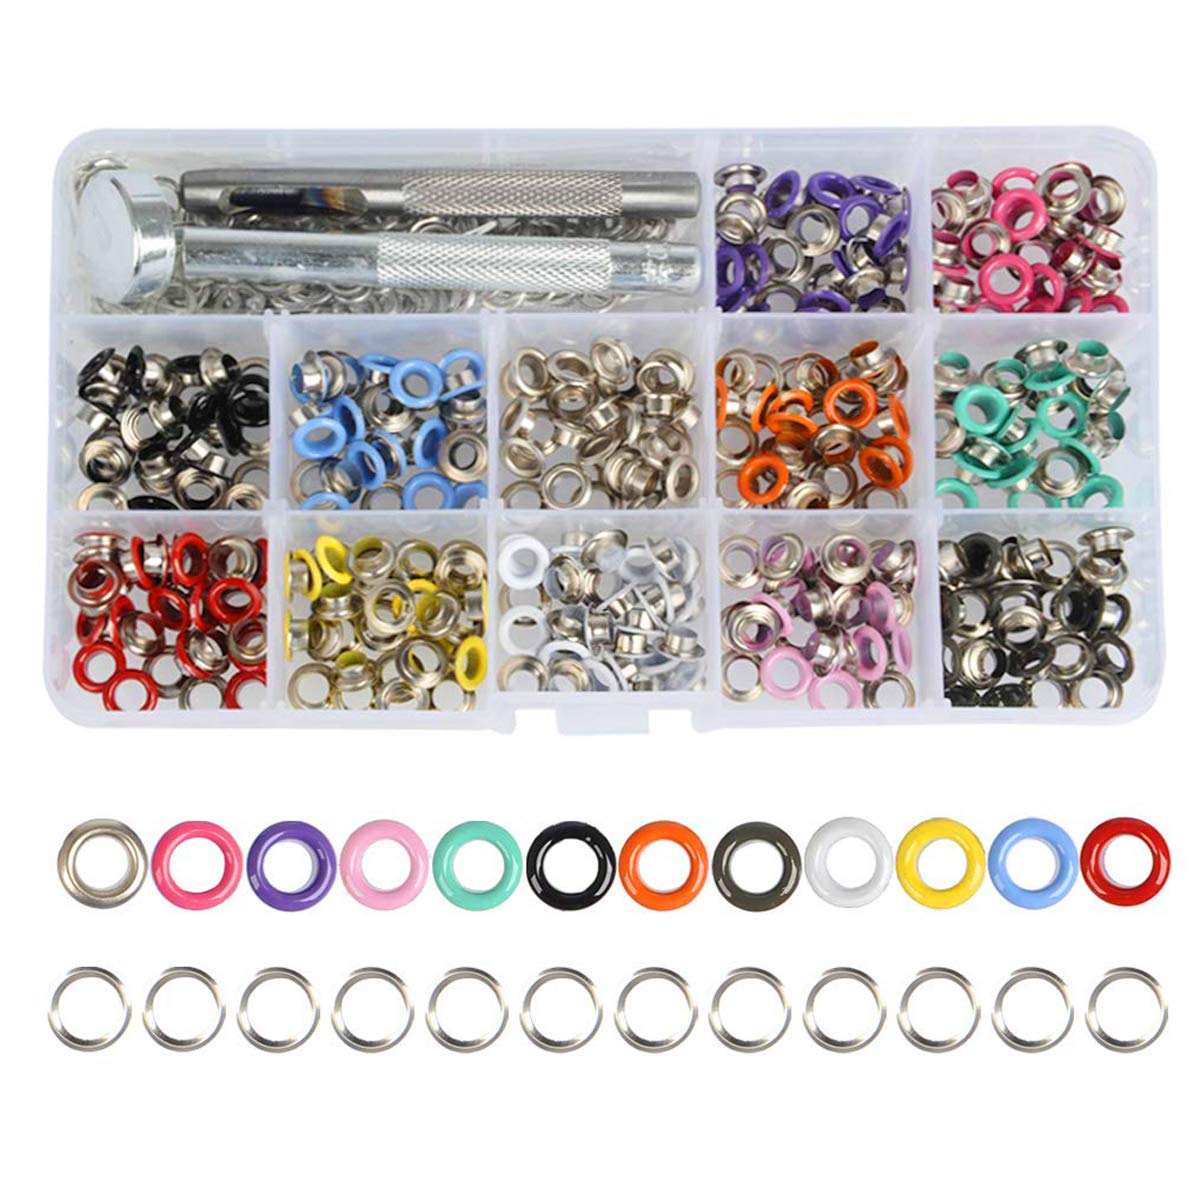 QLOUNI 360 Sets 3/16 inch 12 Colors Grommets Kit Metal Eyelets